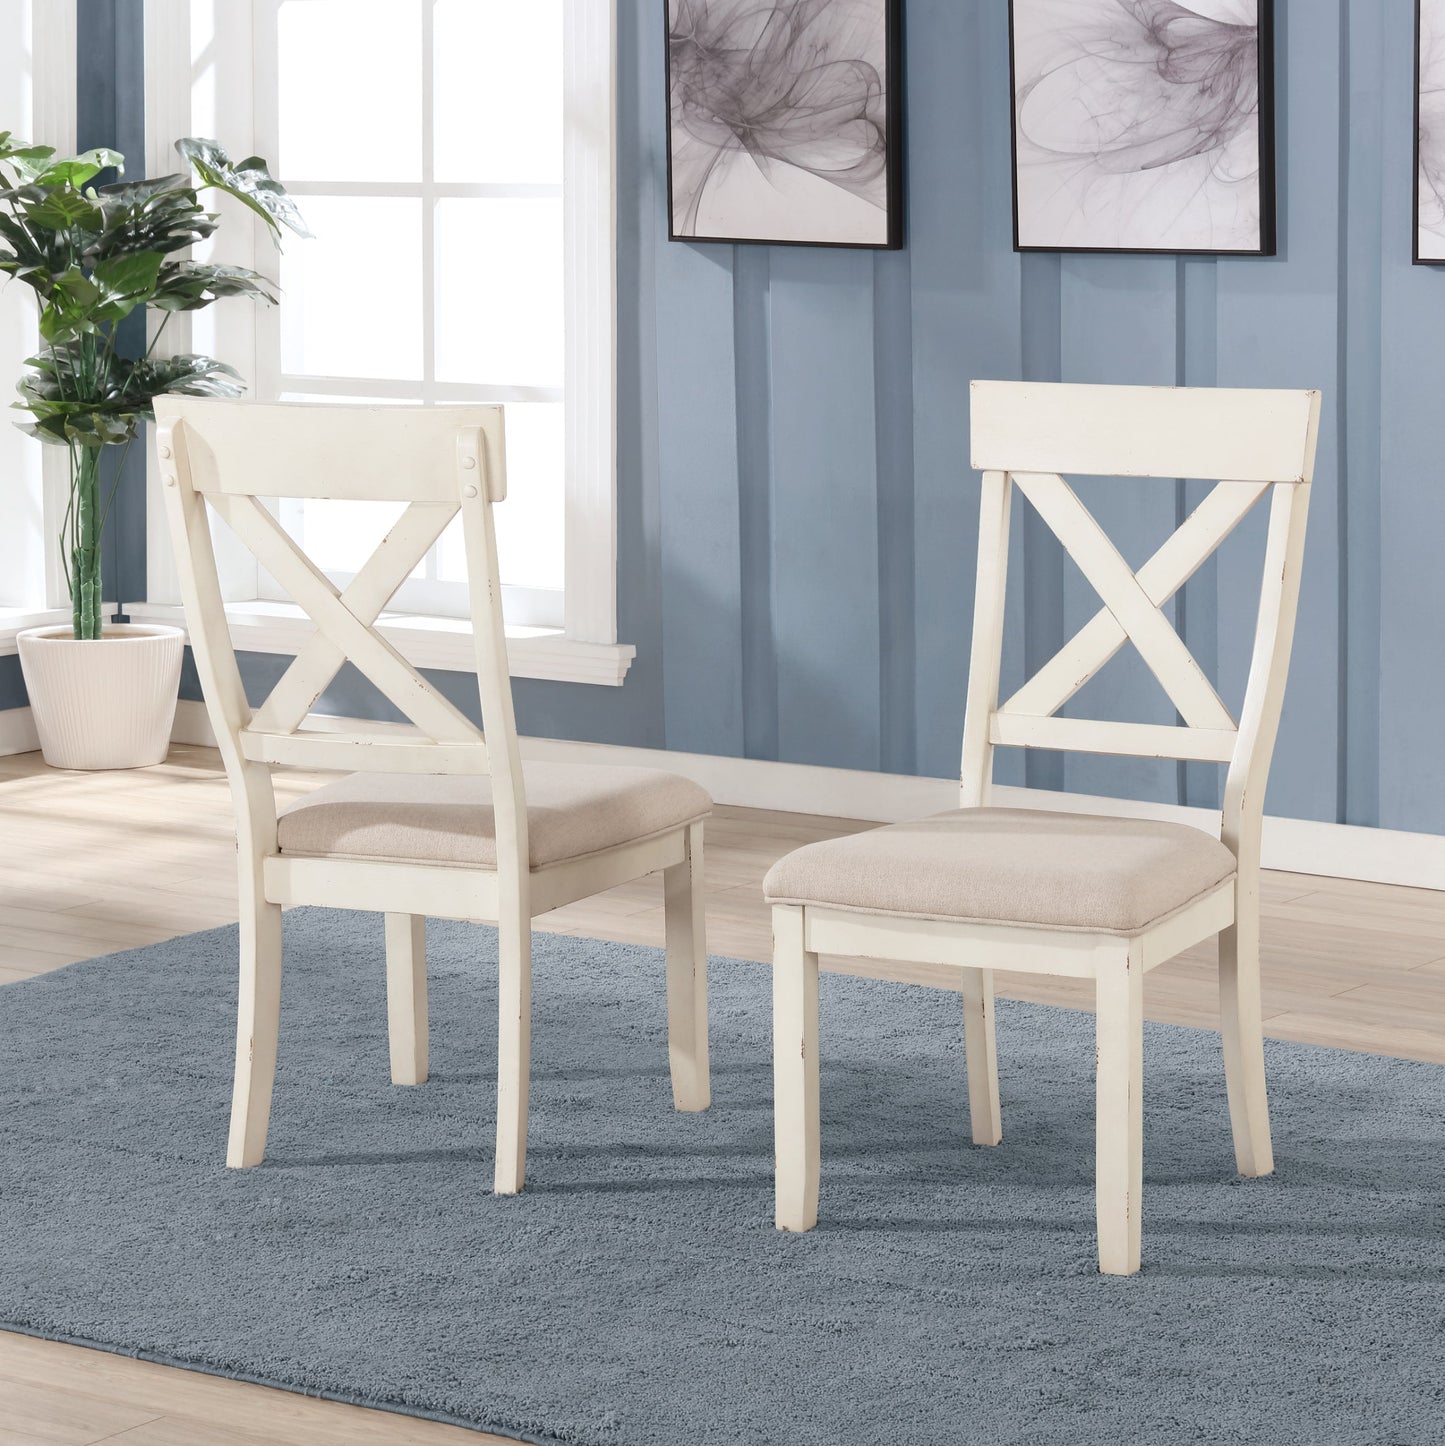 Prato 6-piece Dining Table Set With Cross Back Chairs and Bench, Antique White and Distressed Oak